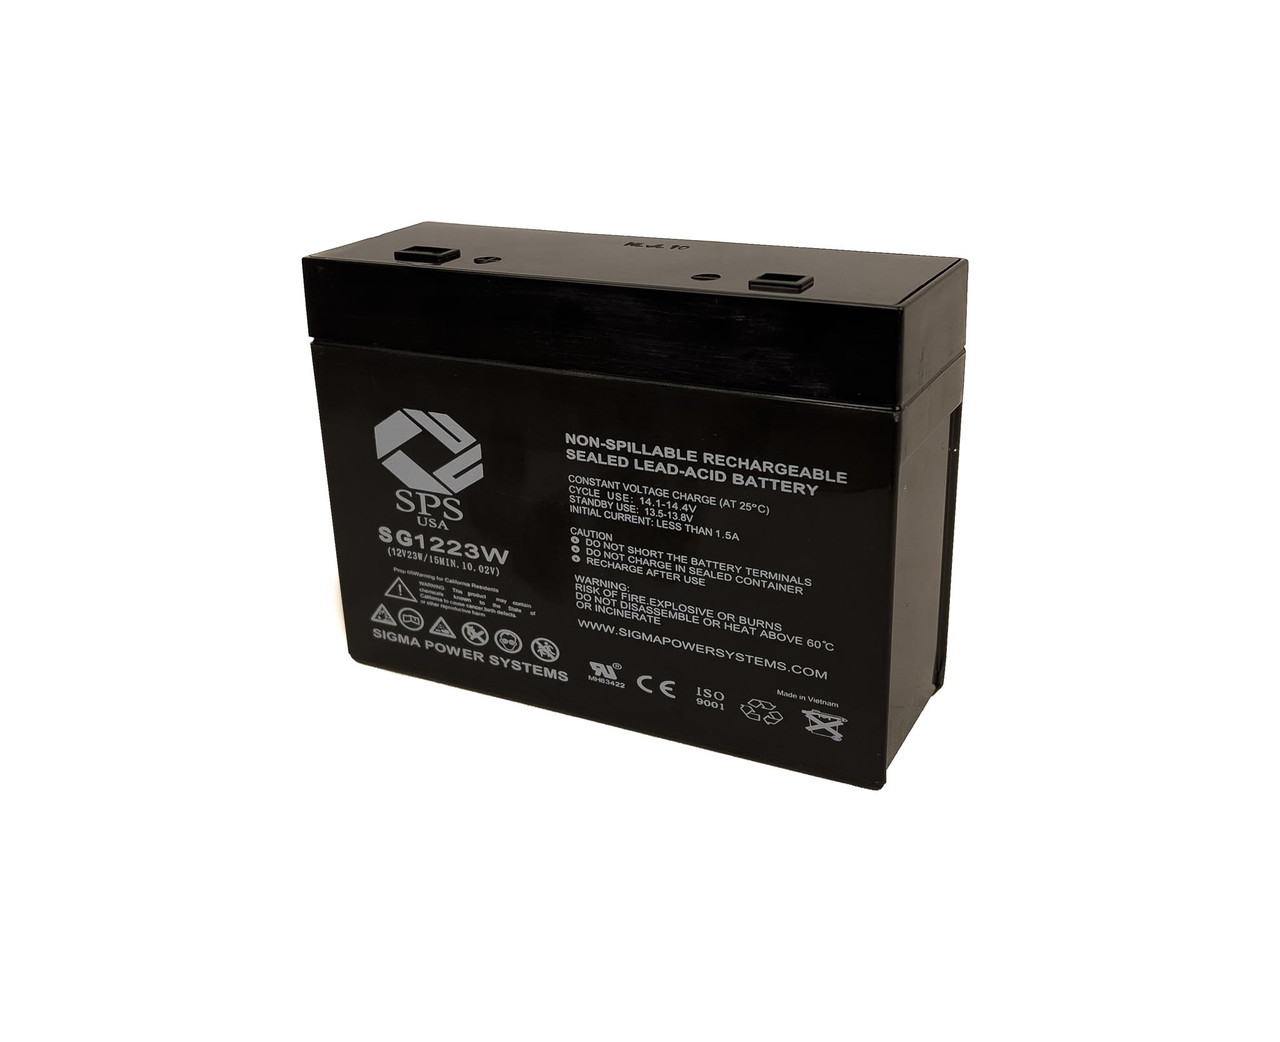 Raion Power 12V 5.2Ah 23W Non-Spillable Replacement Battery for SigmasTek SP12-5.5RT